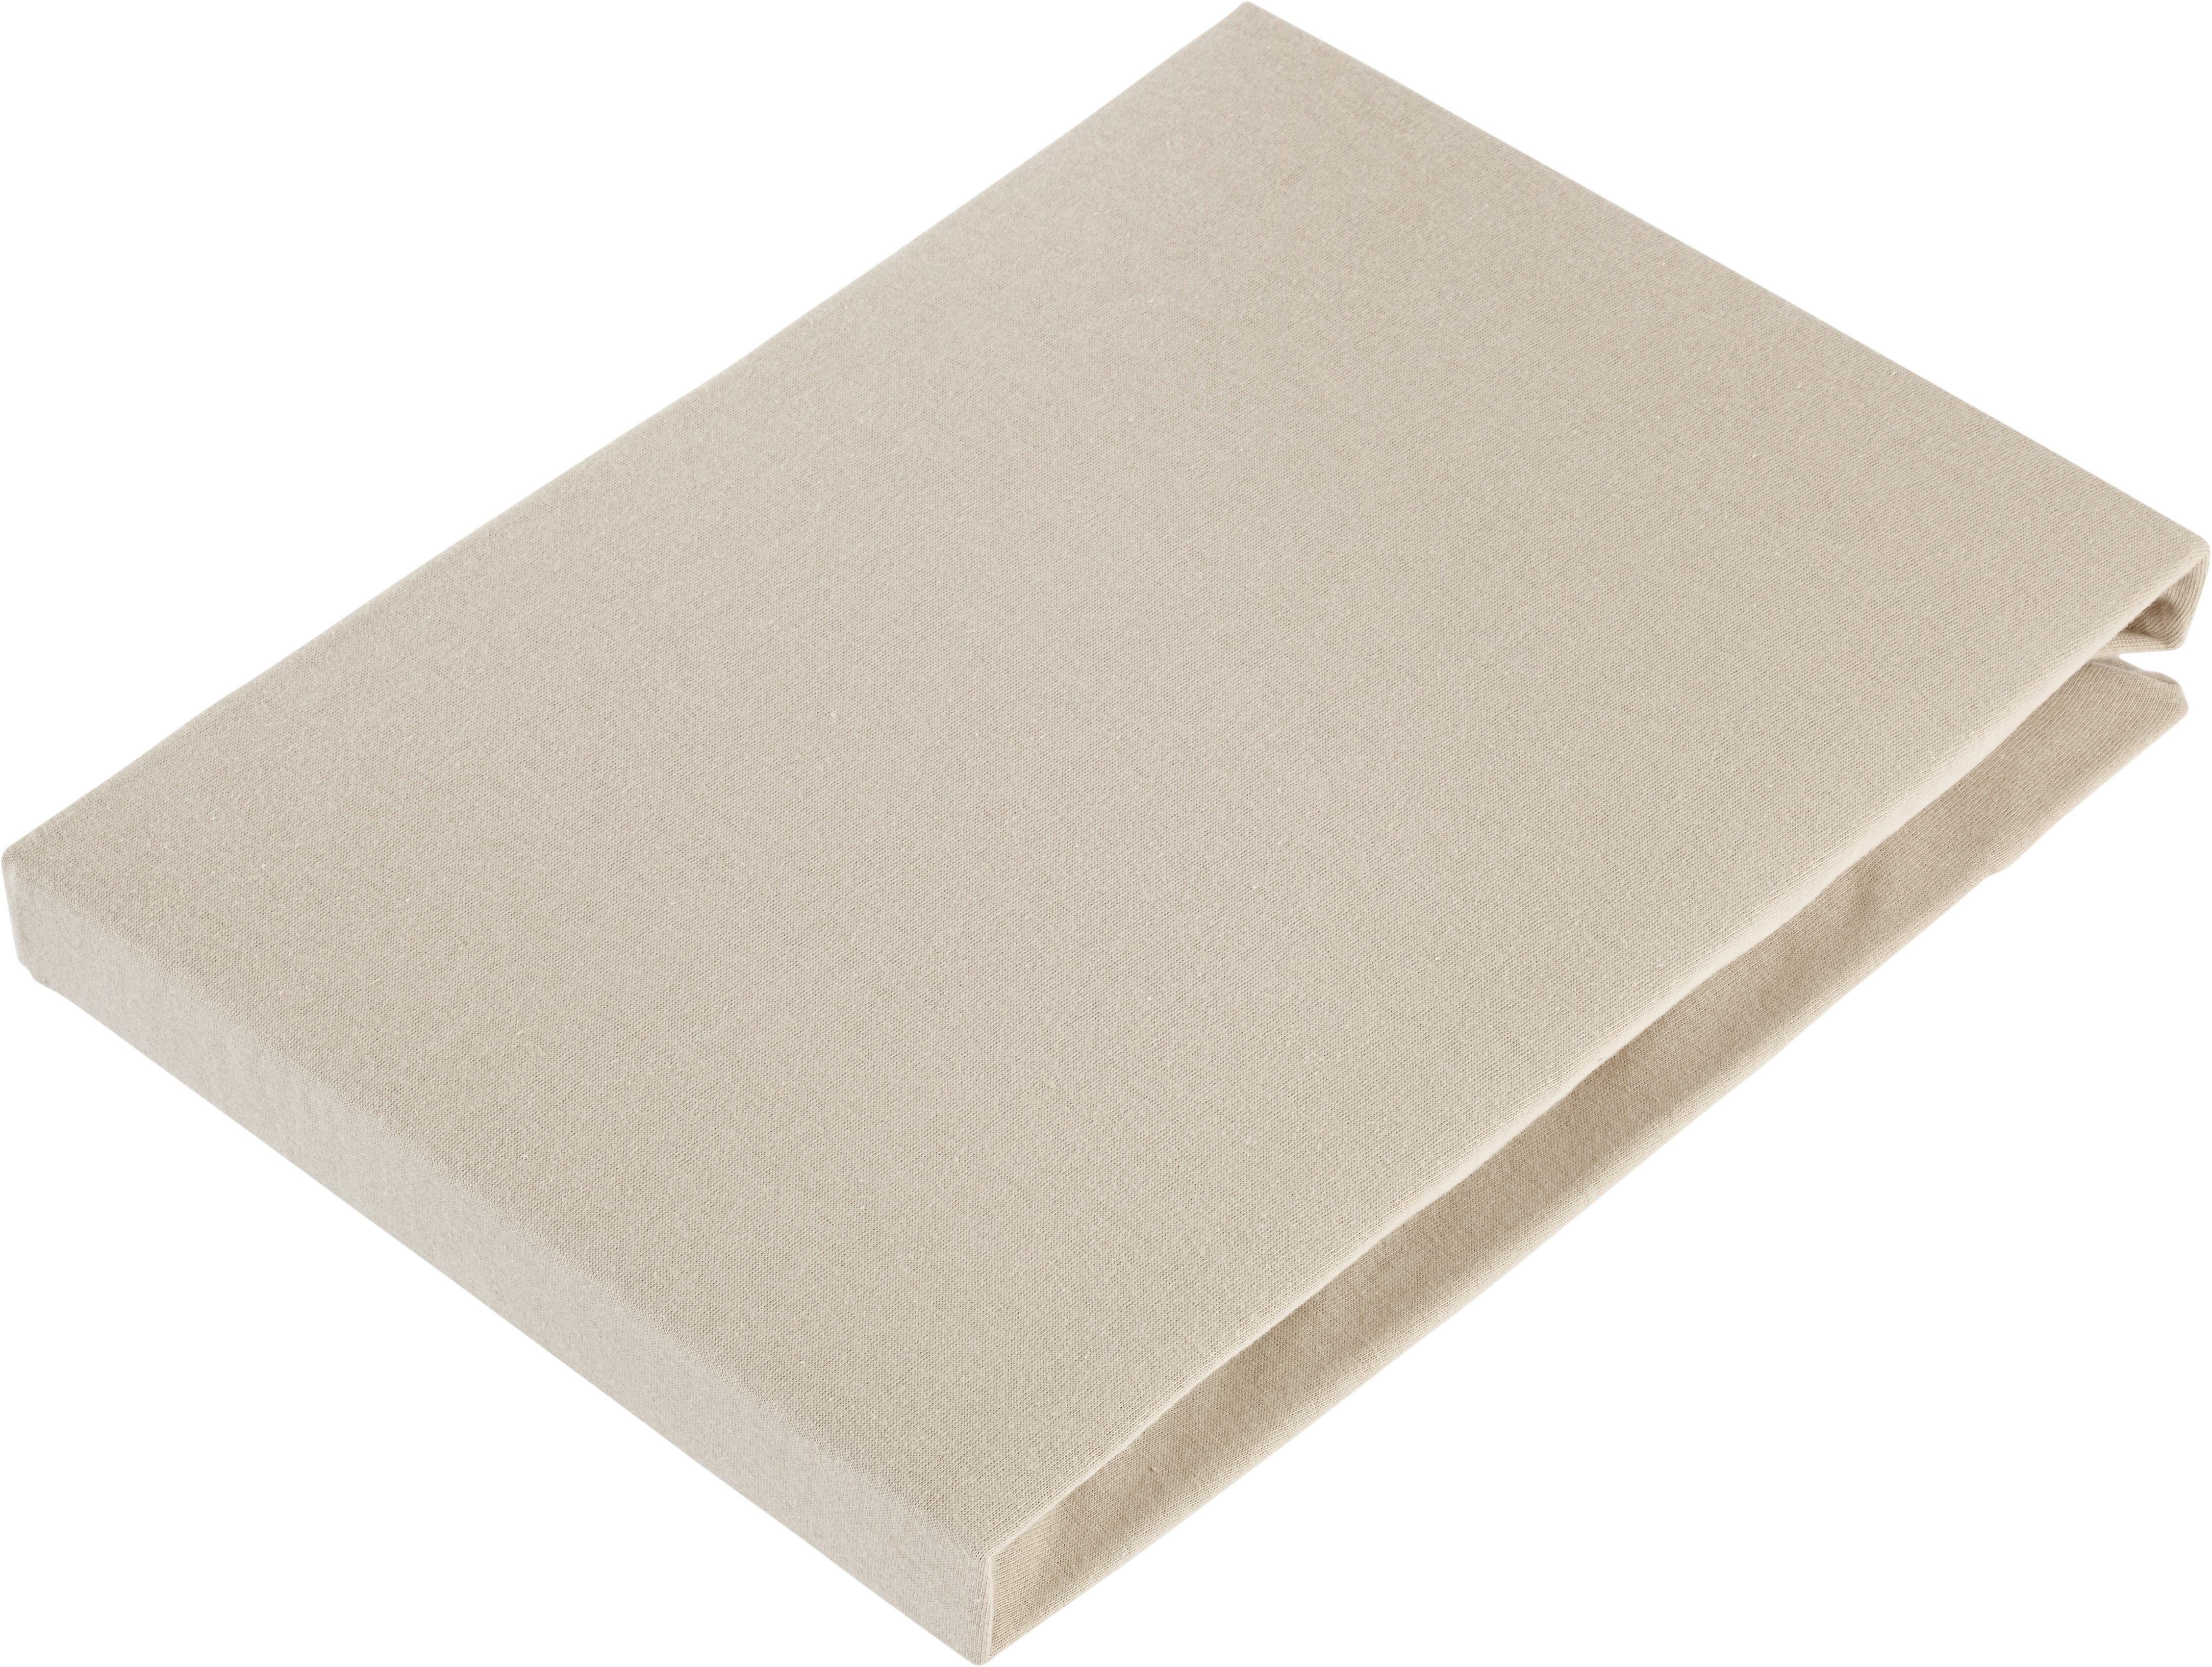 Fixleintuch Basic in Taupe ca. 100x200cm - Taupe, Textil (100/200cm) - Modern Living